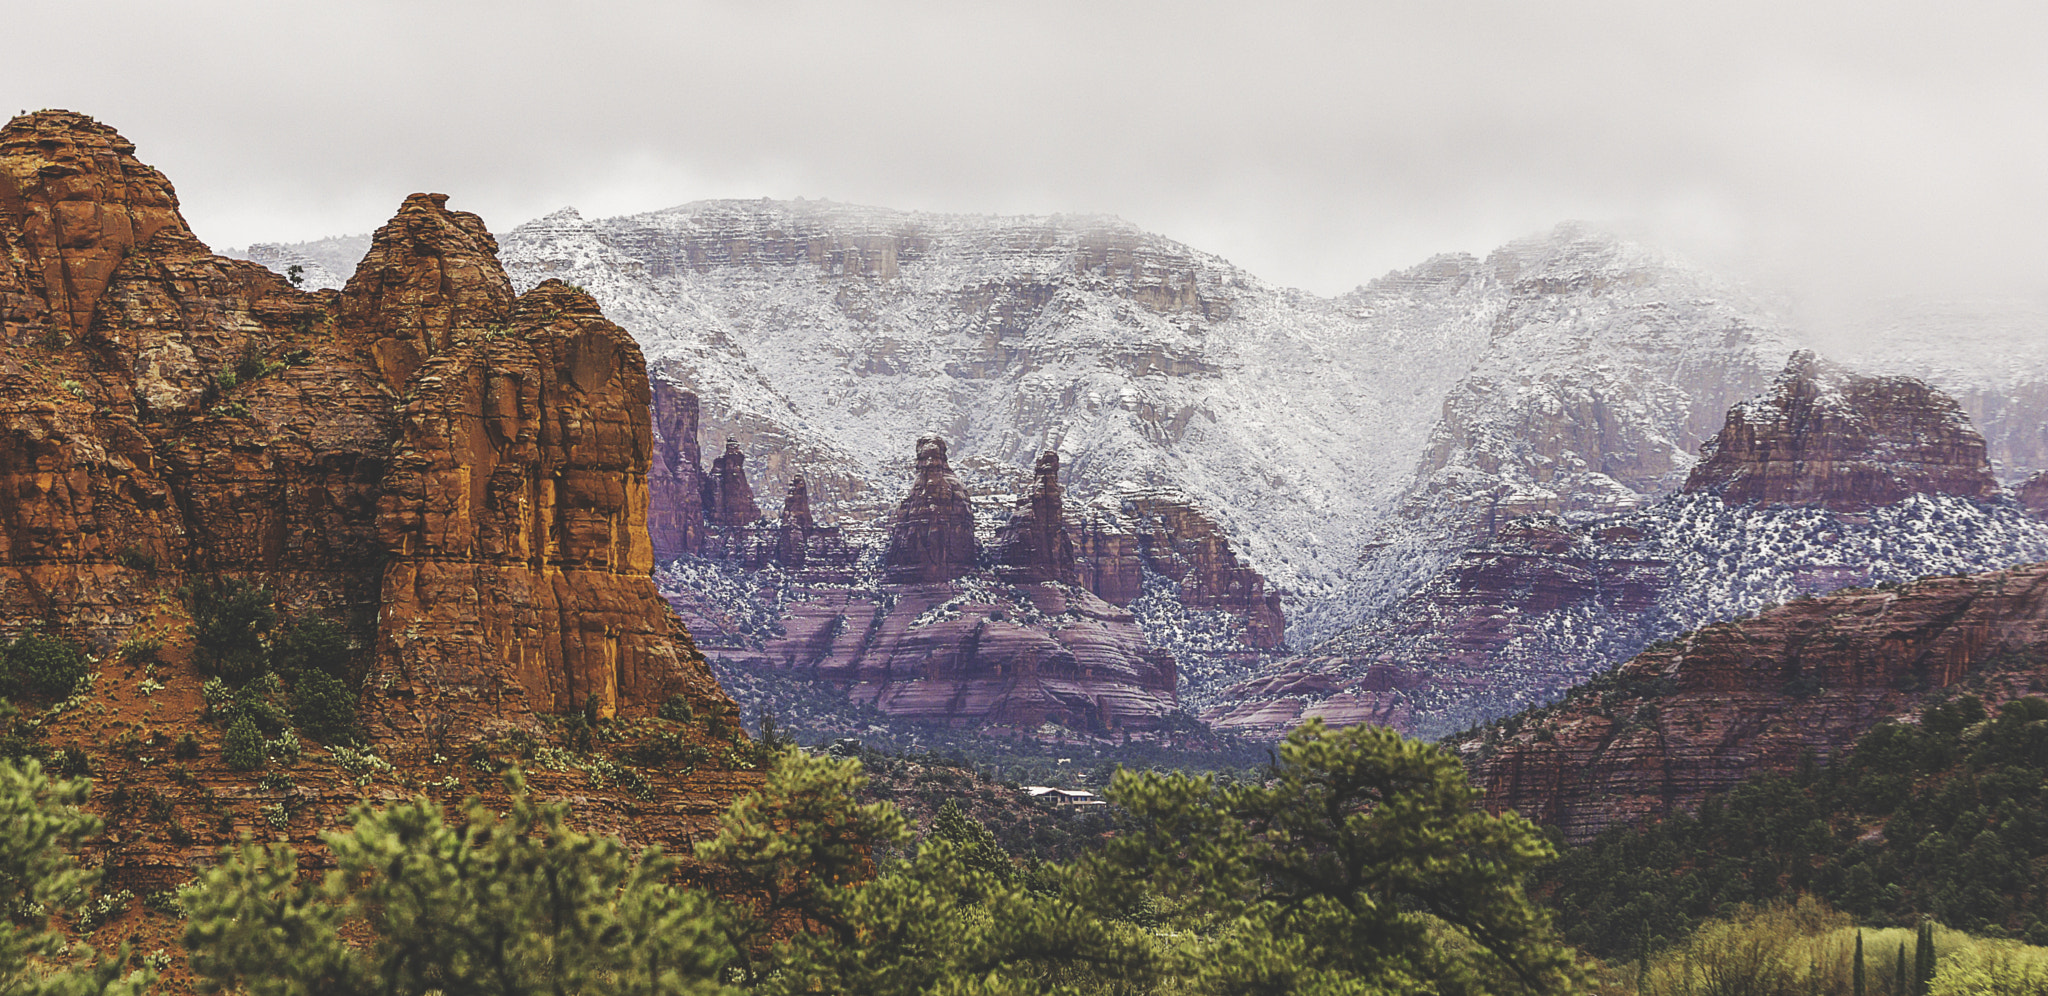 Sony SLT-A77 sample photo. Snow over the red rocks of sedona photography